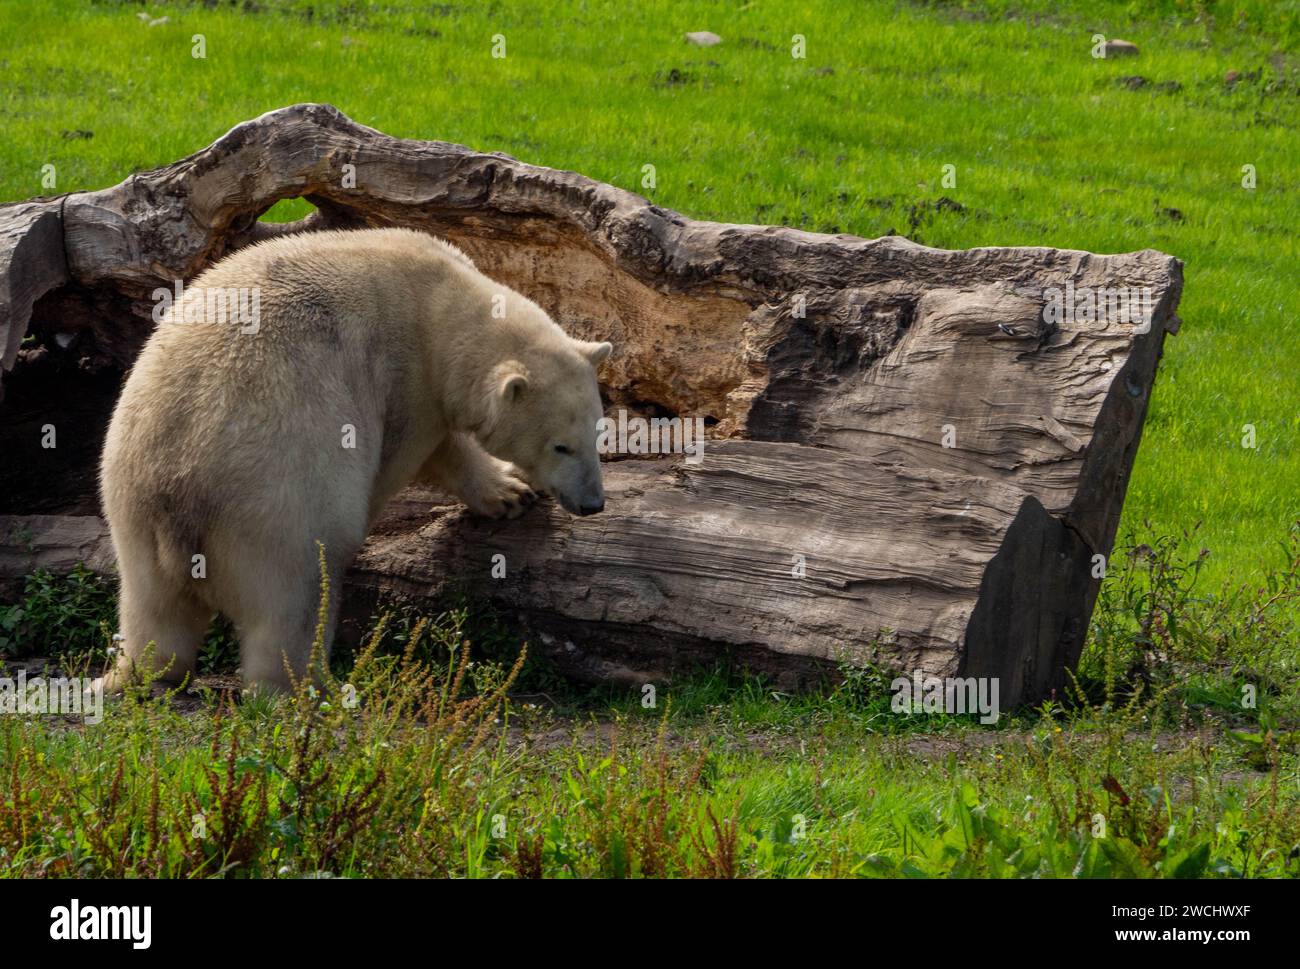 Polar Bear digging in an old cut-down tree trunk in the field Stock Photo